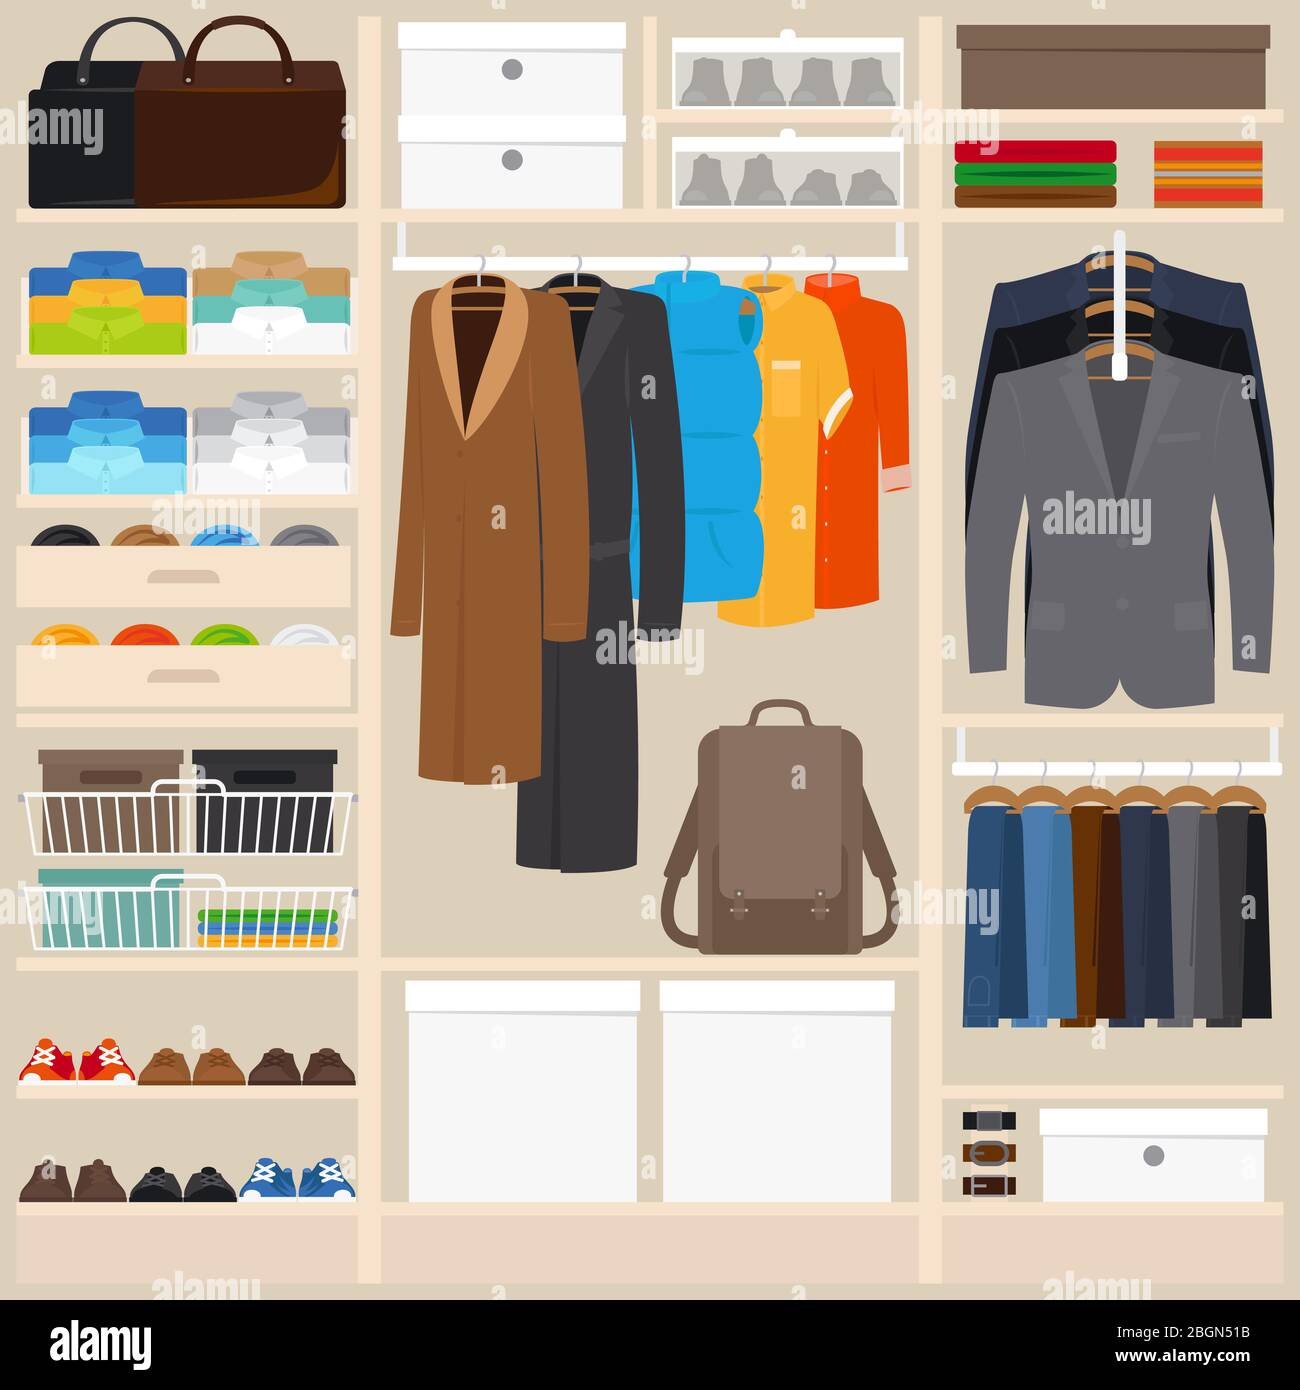 Clothes wardrobe vector illustration. Wardrobe room with mens cloths in flat style Stock Vector